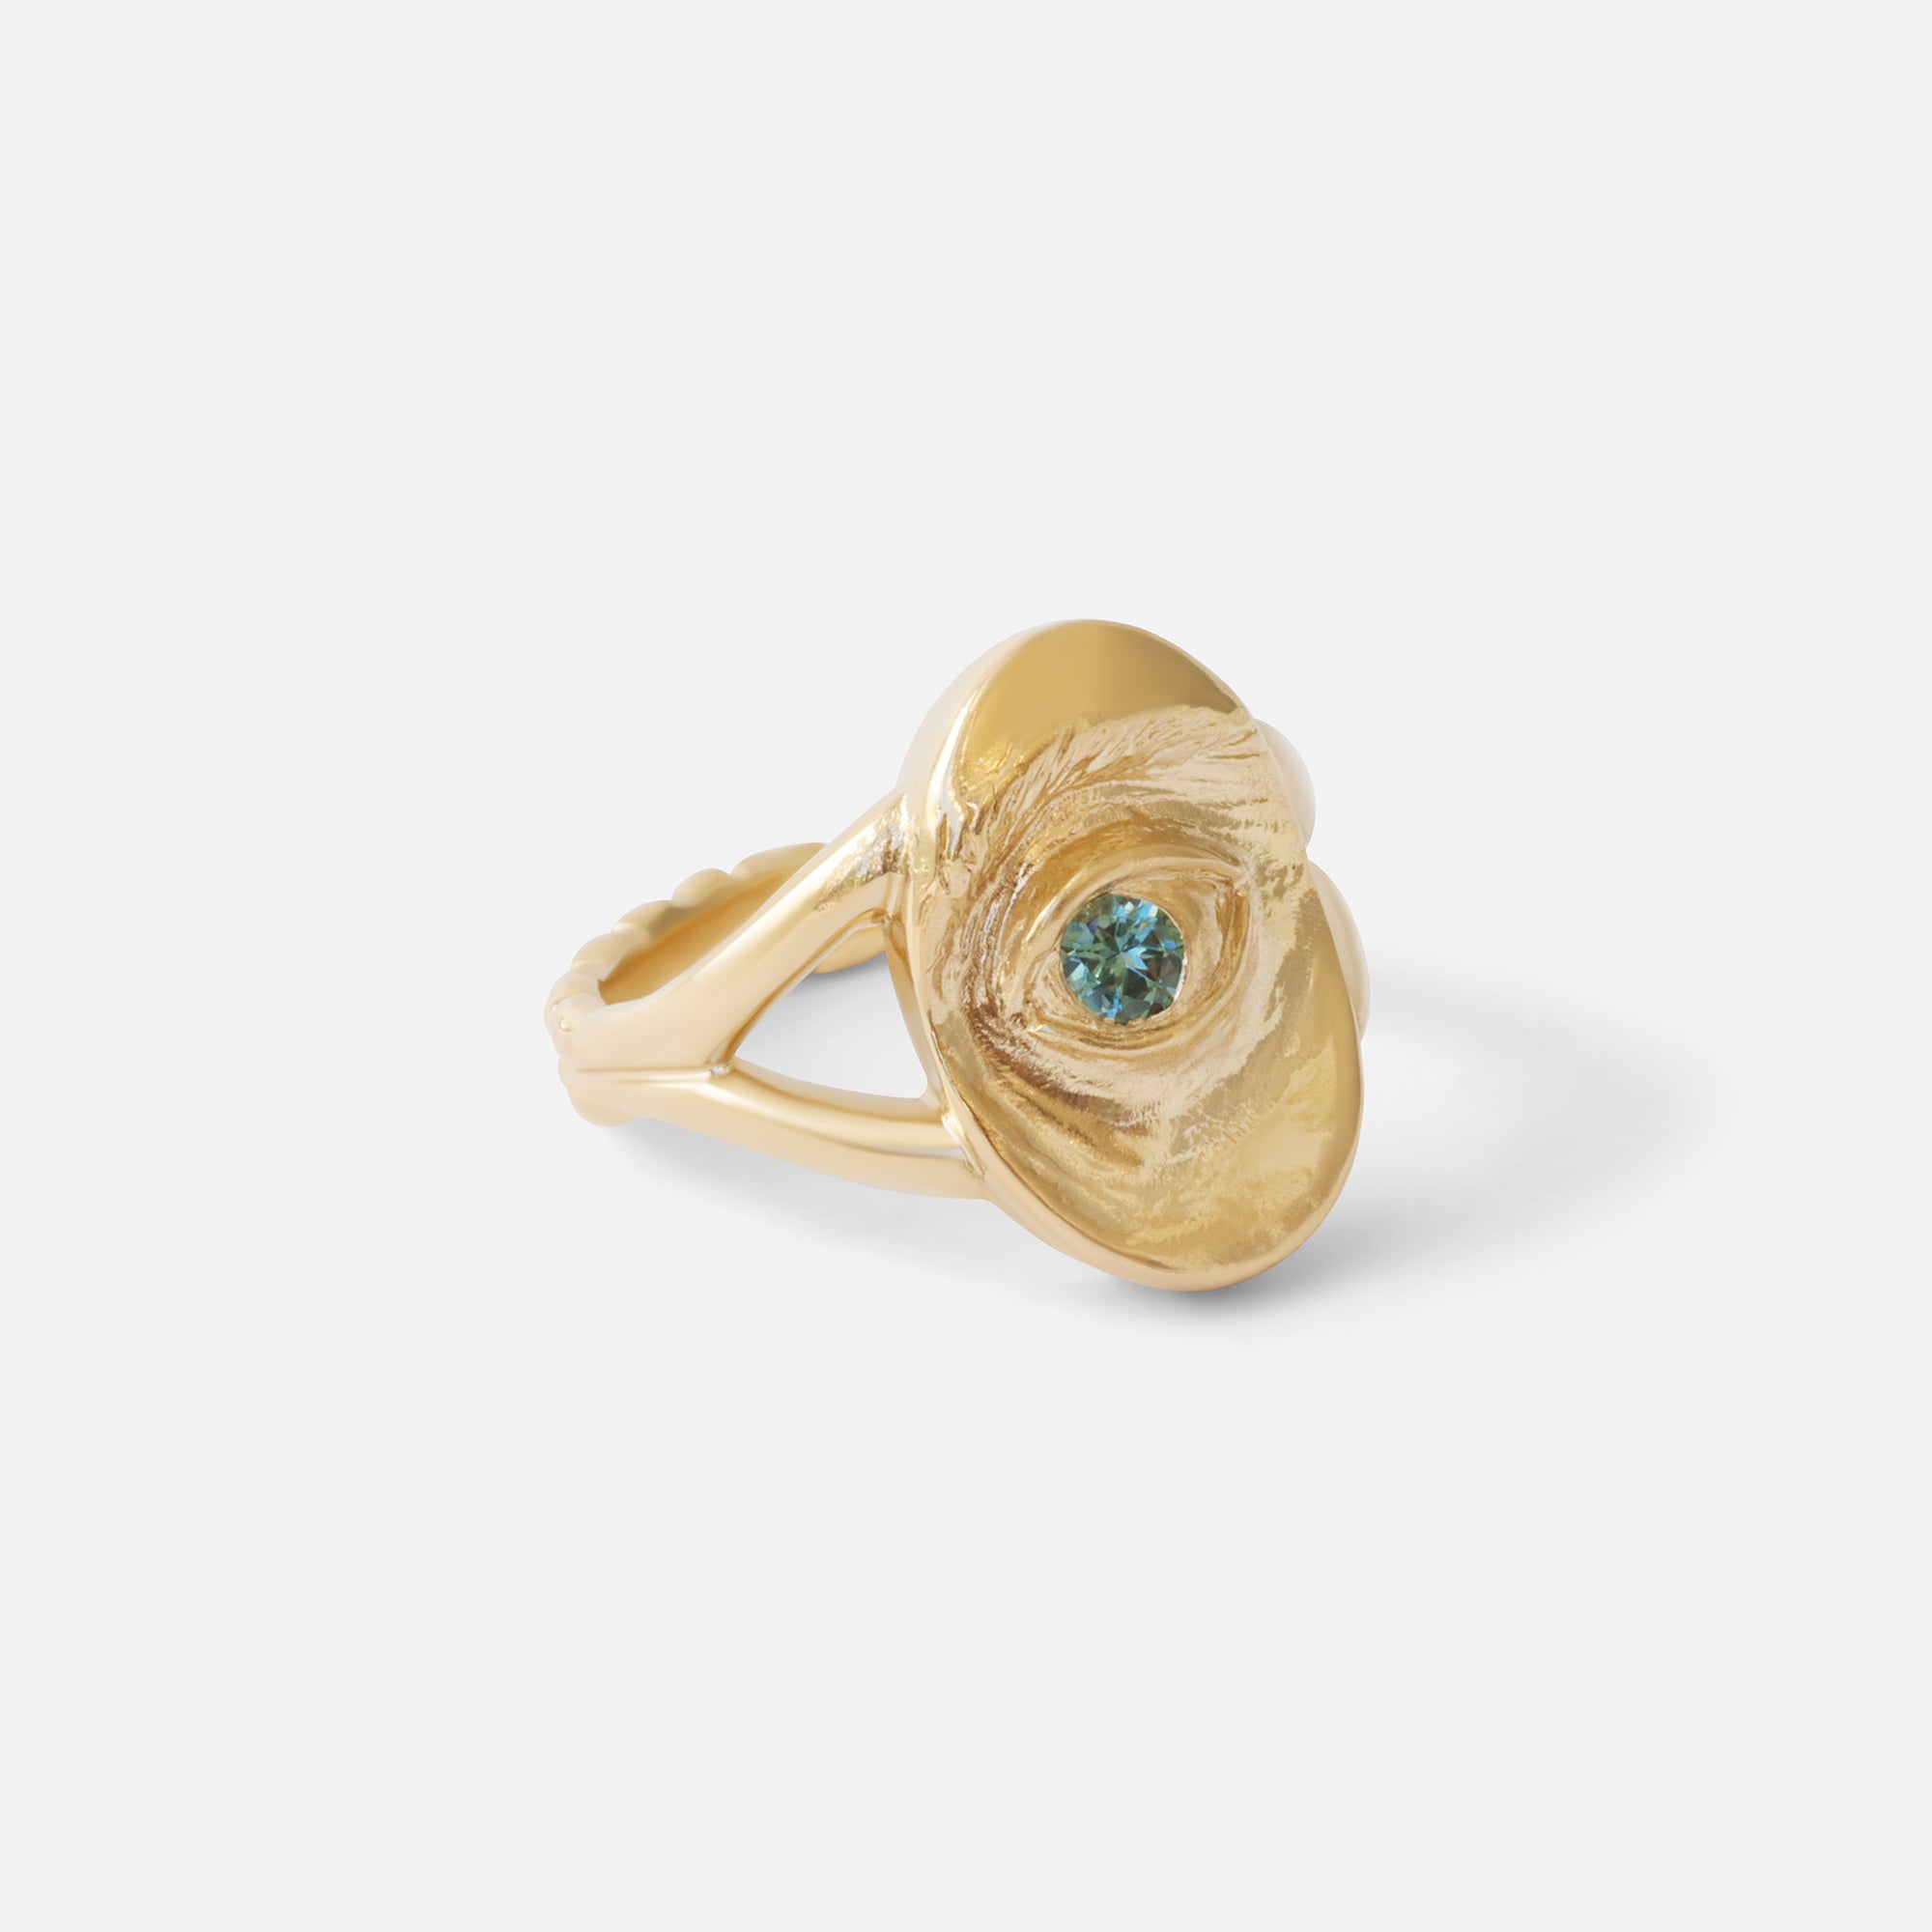 Intagliaux / Oval Green Sapphire Ring By Alfonzo